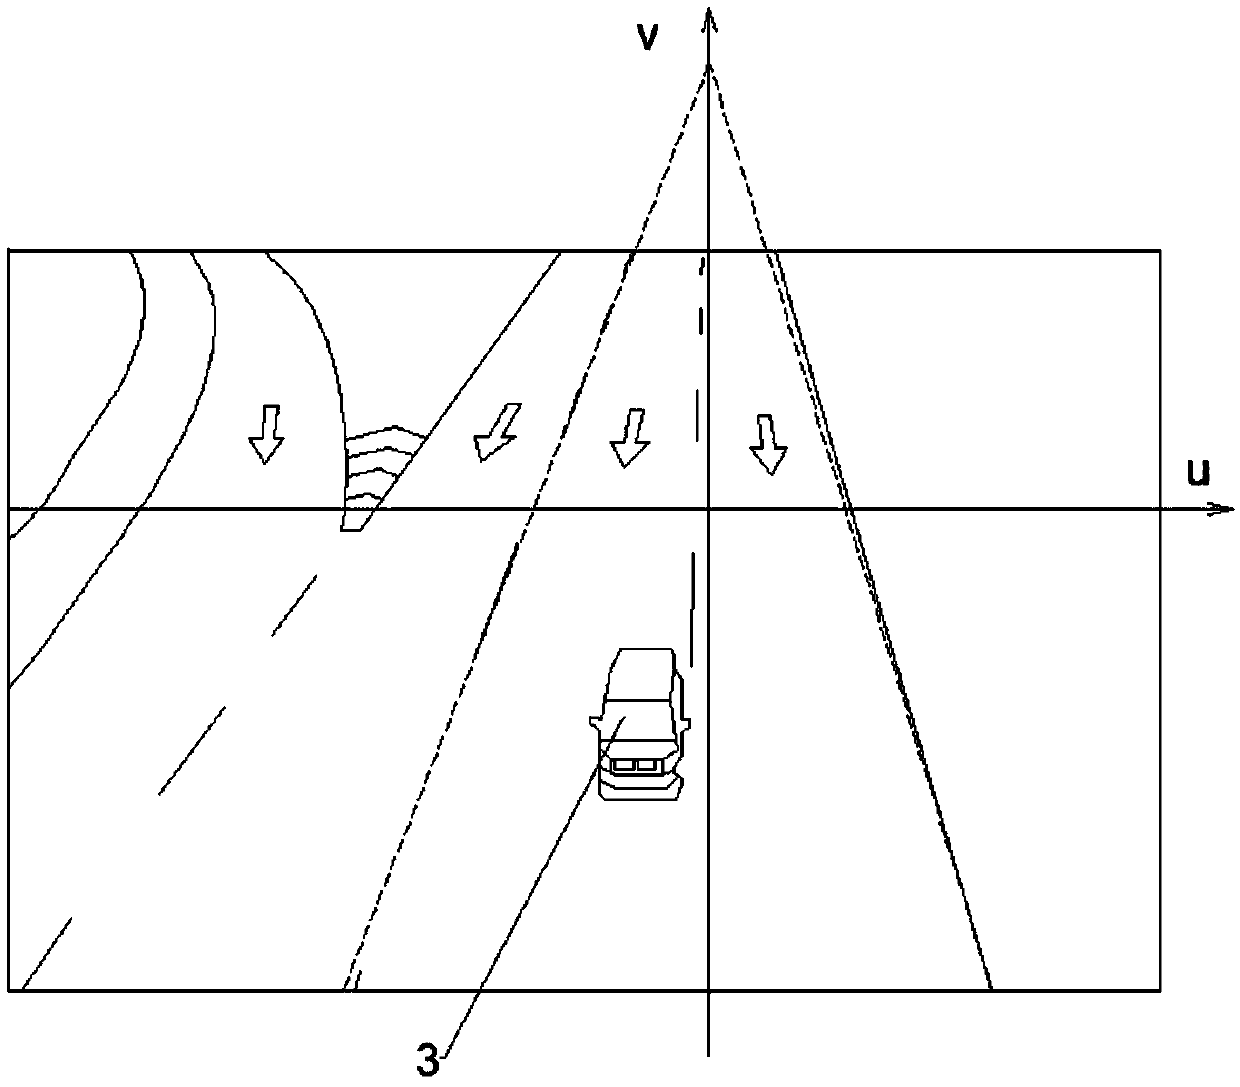 Vehicle speed real-time measurement method based on video processing